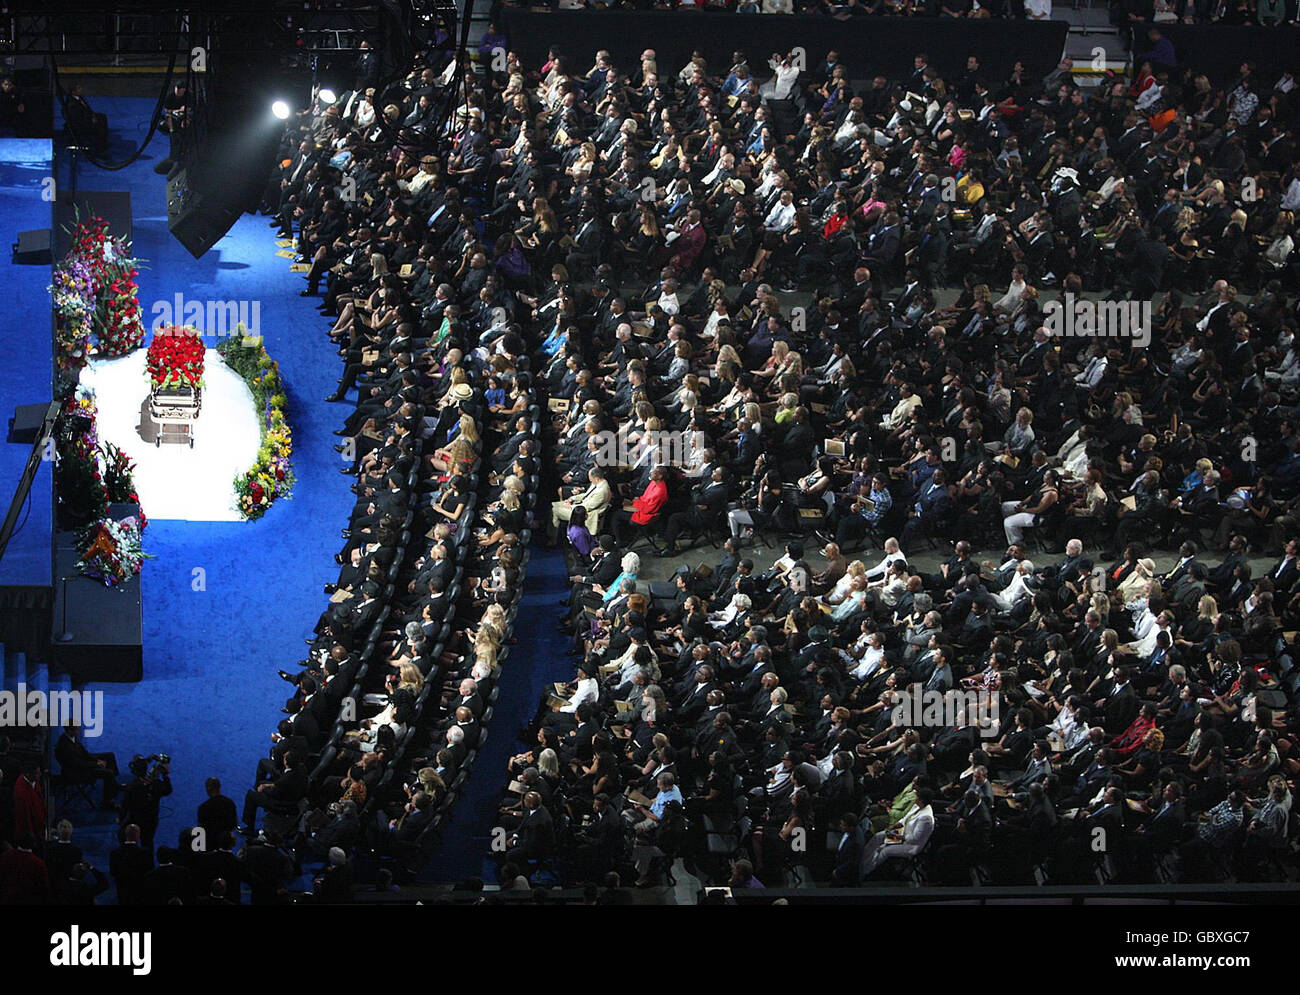 The rose covered coffin rests in the front of stage during a memorial service for Michael Jackson at the Staples Center in Los Angeles. Stock Photo